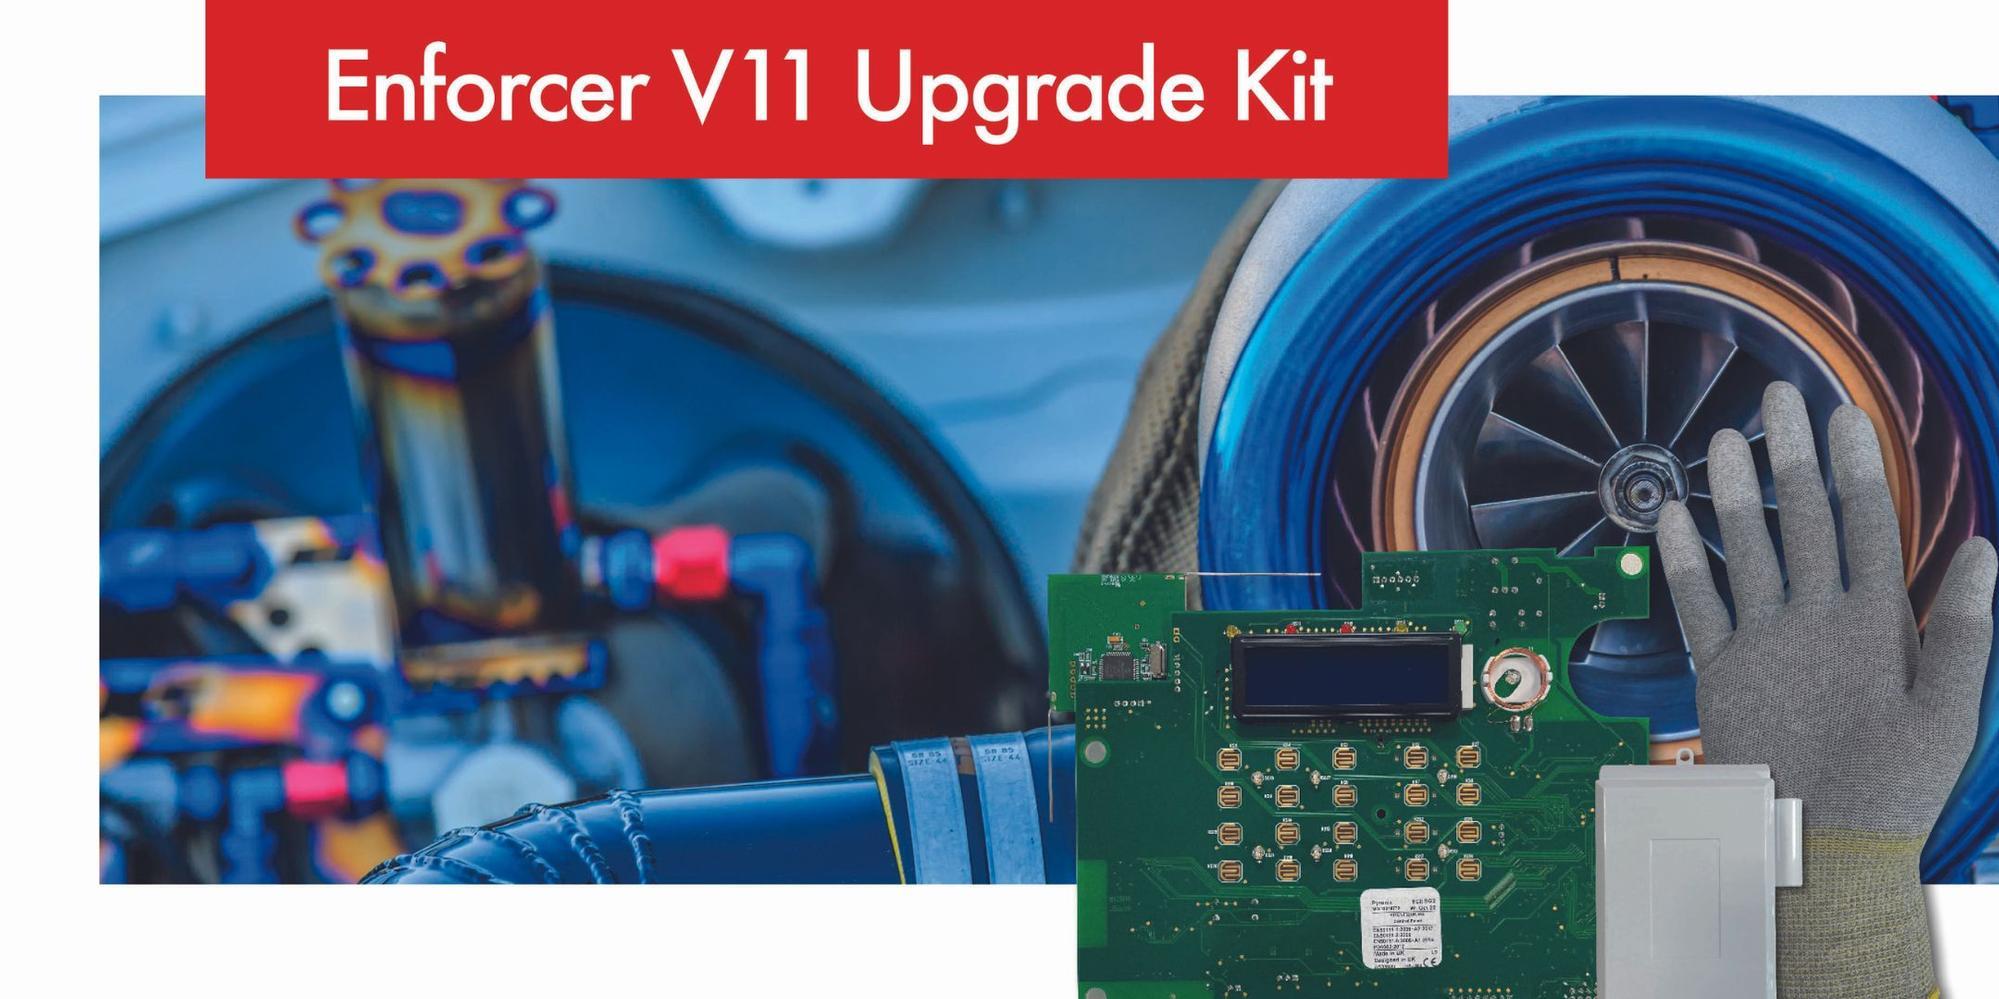 Pyronix launches its Enforcer V11 Upgrade Kit